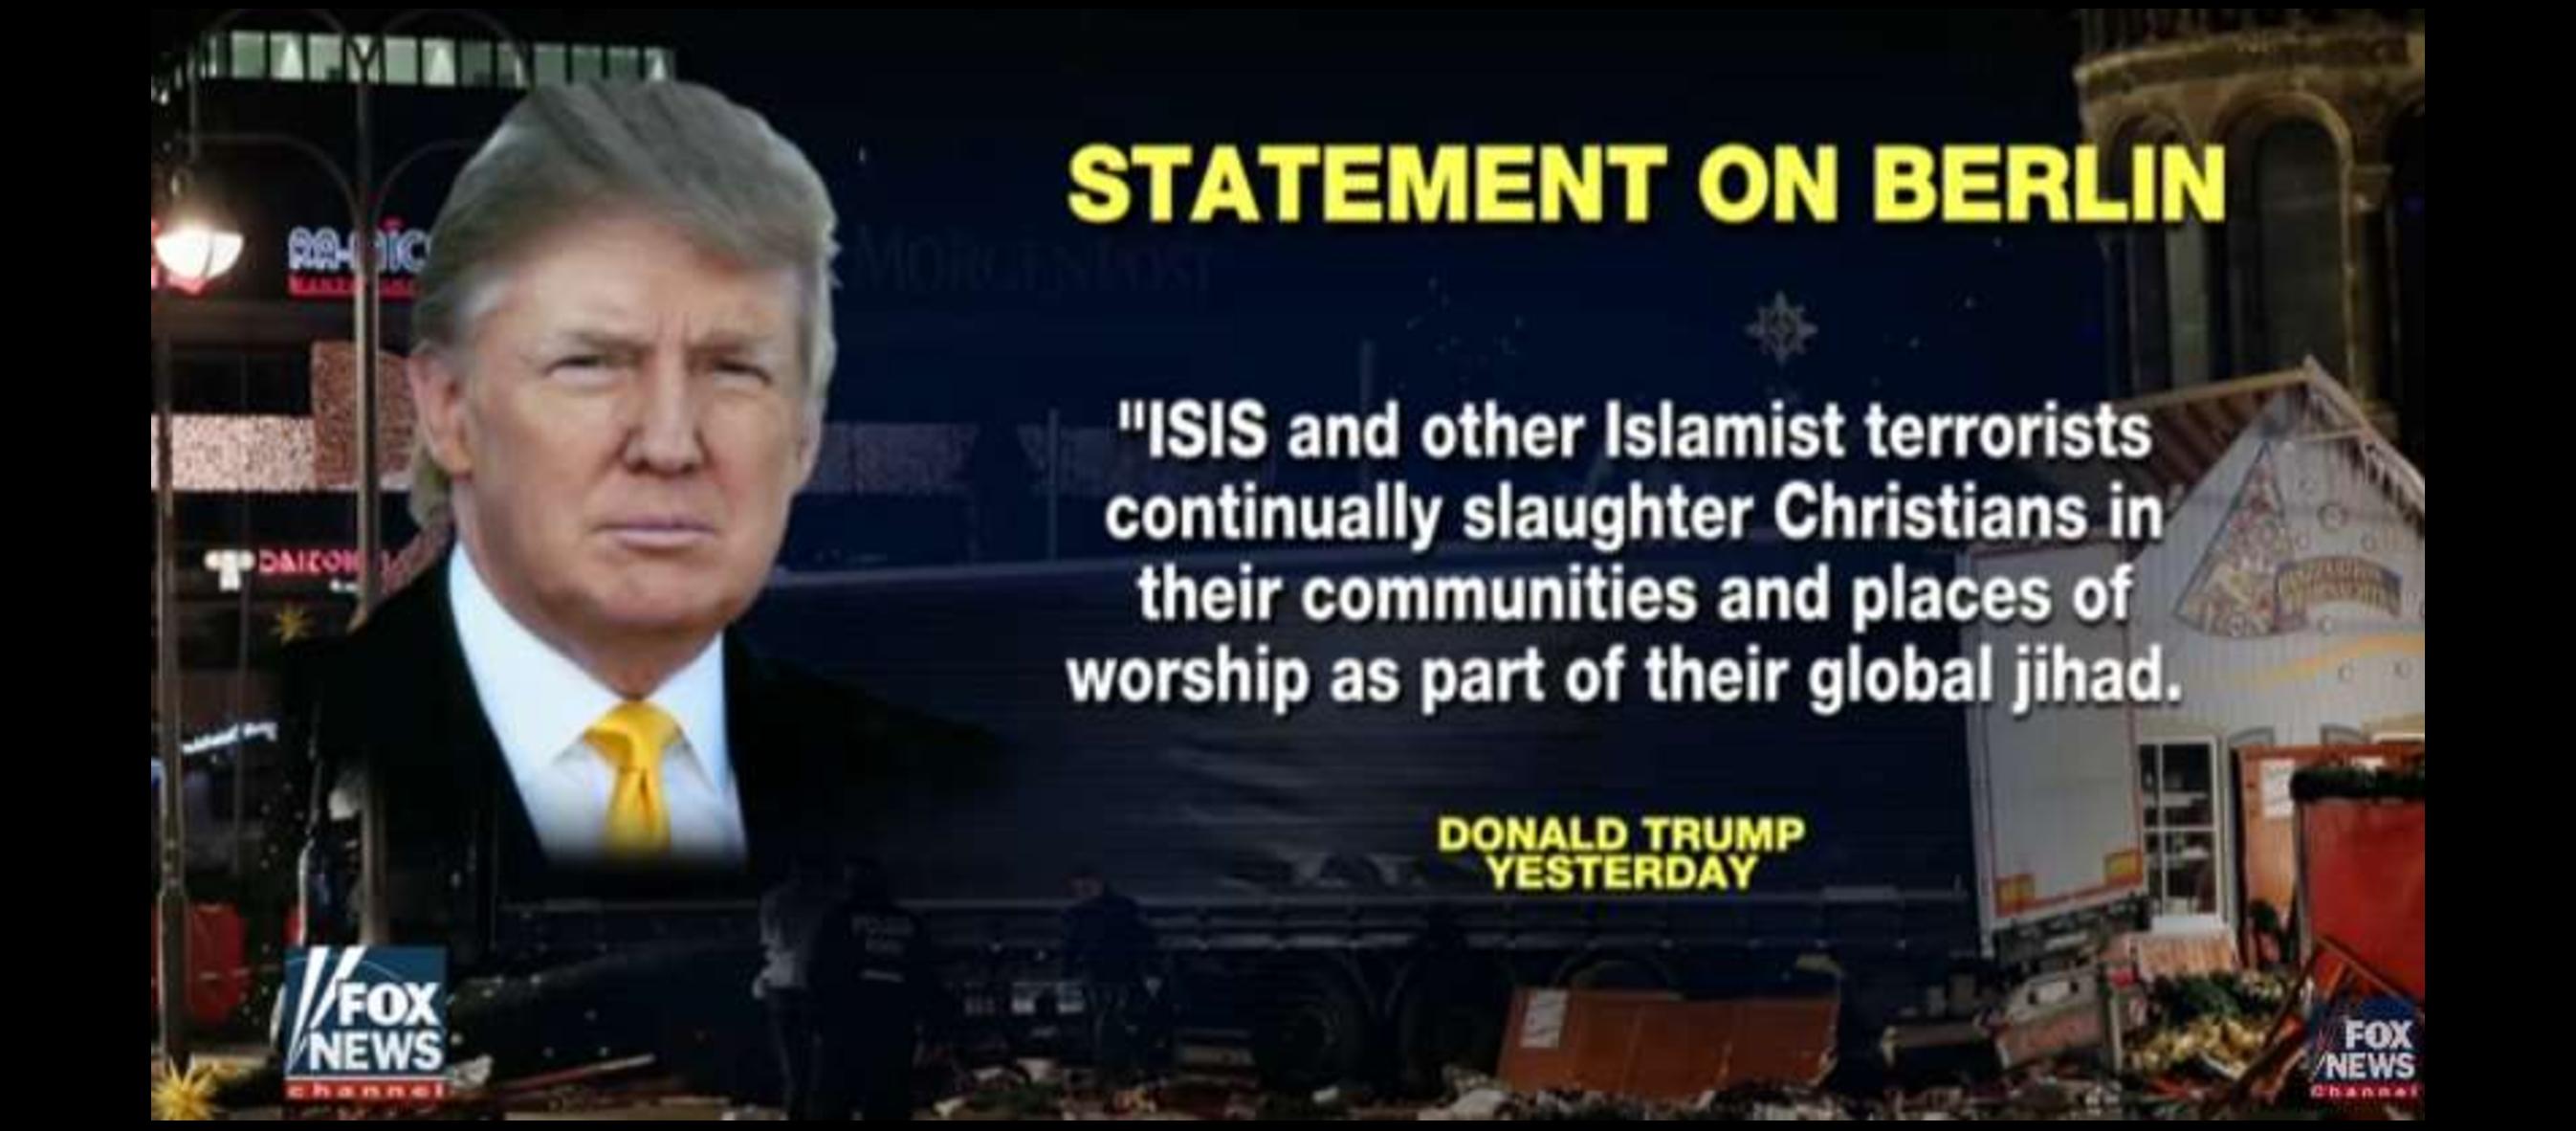 WATCH: “Islamists…continually slaughter Christians,” says Trump